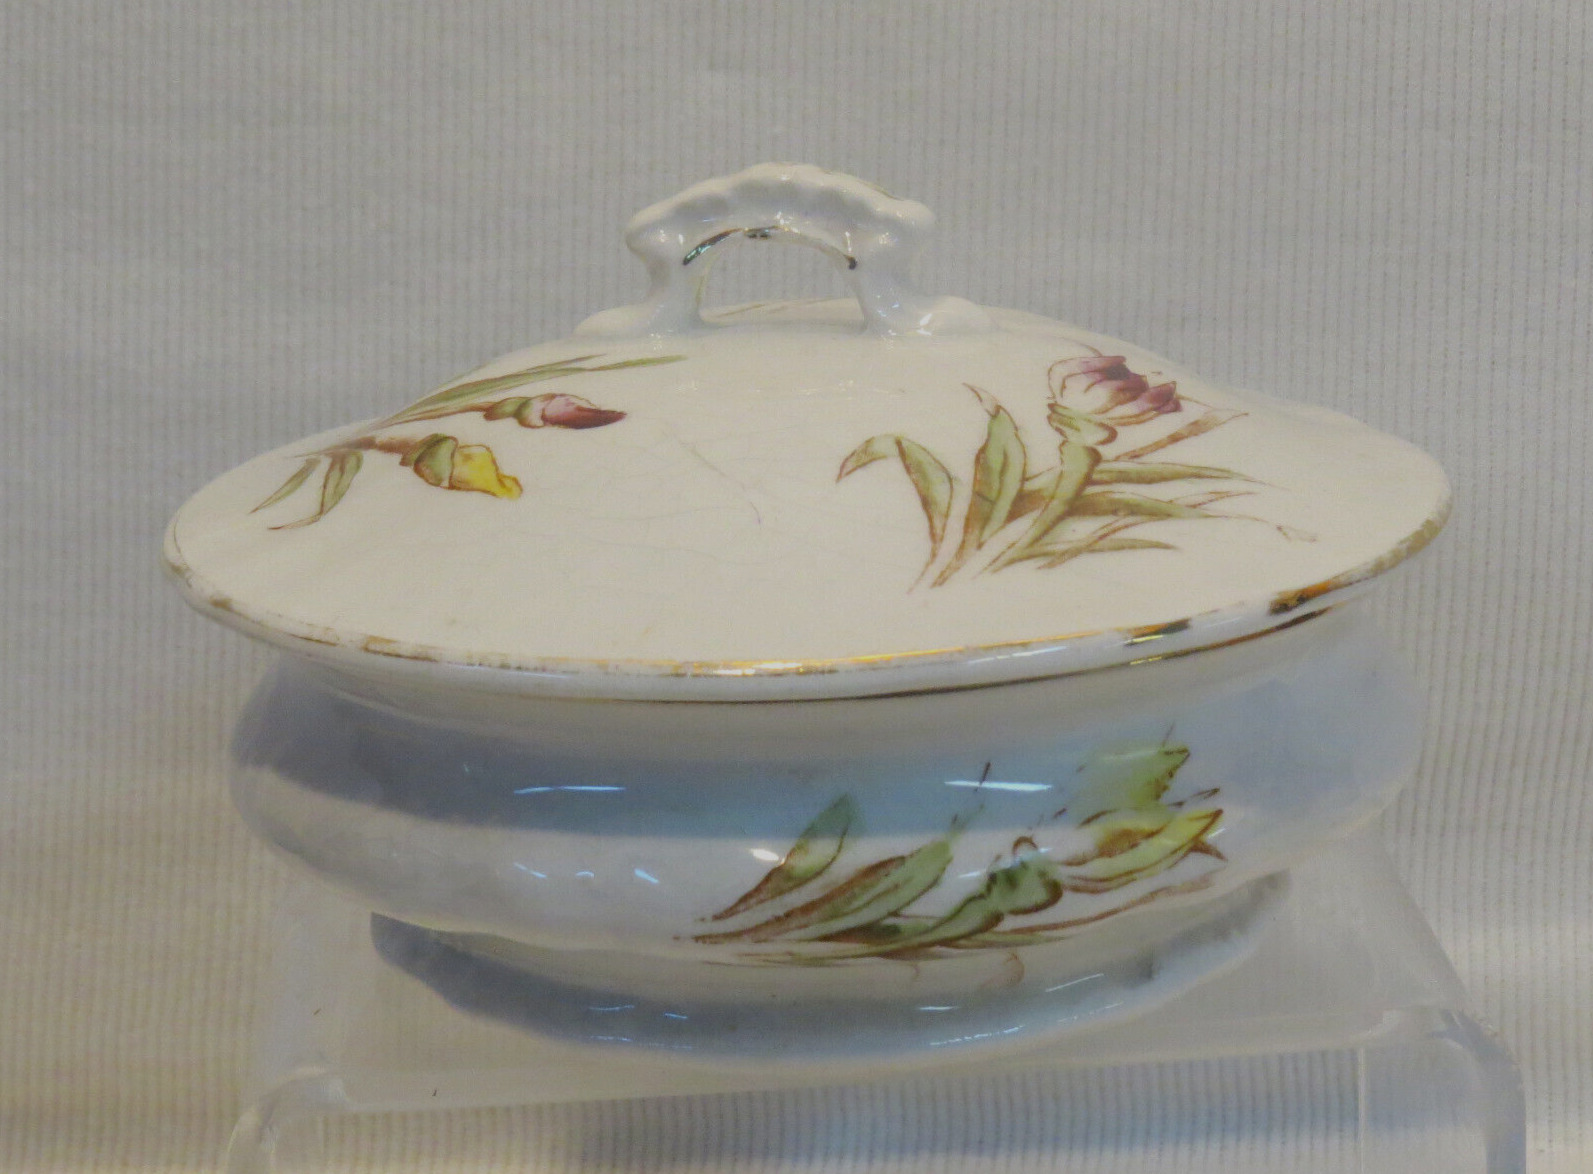 RARE Antique Homer Laughlin WYOMING Shape Covered Soap Dish w/Liner, Beautiful